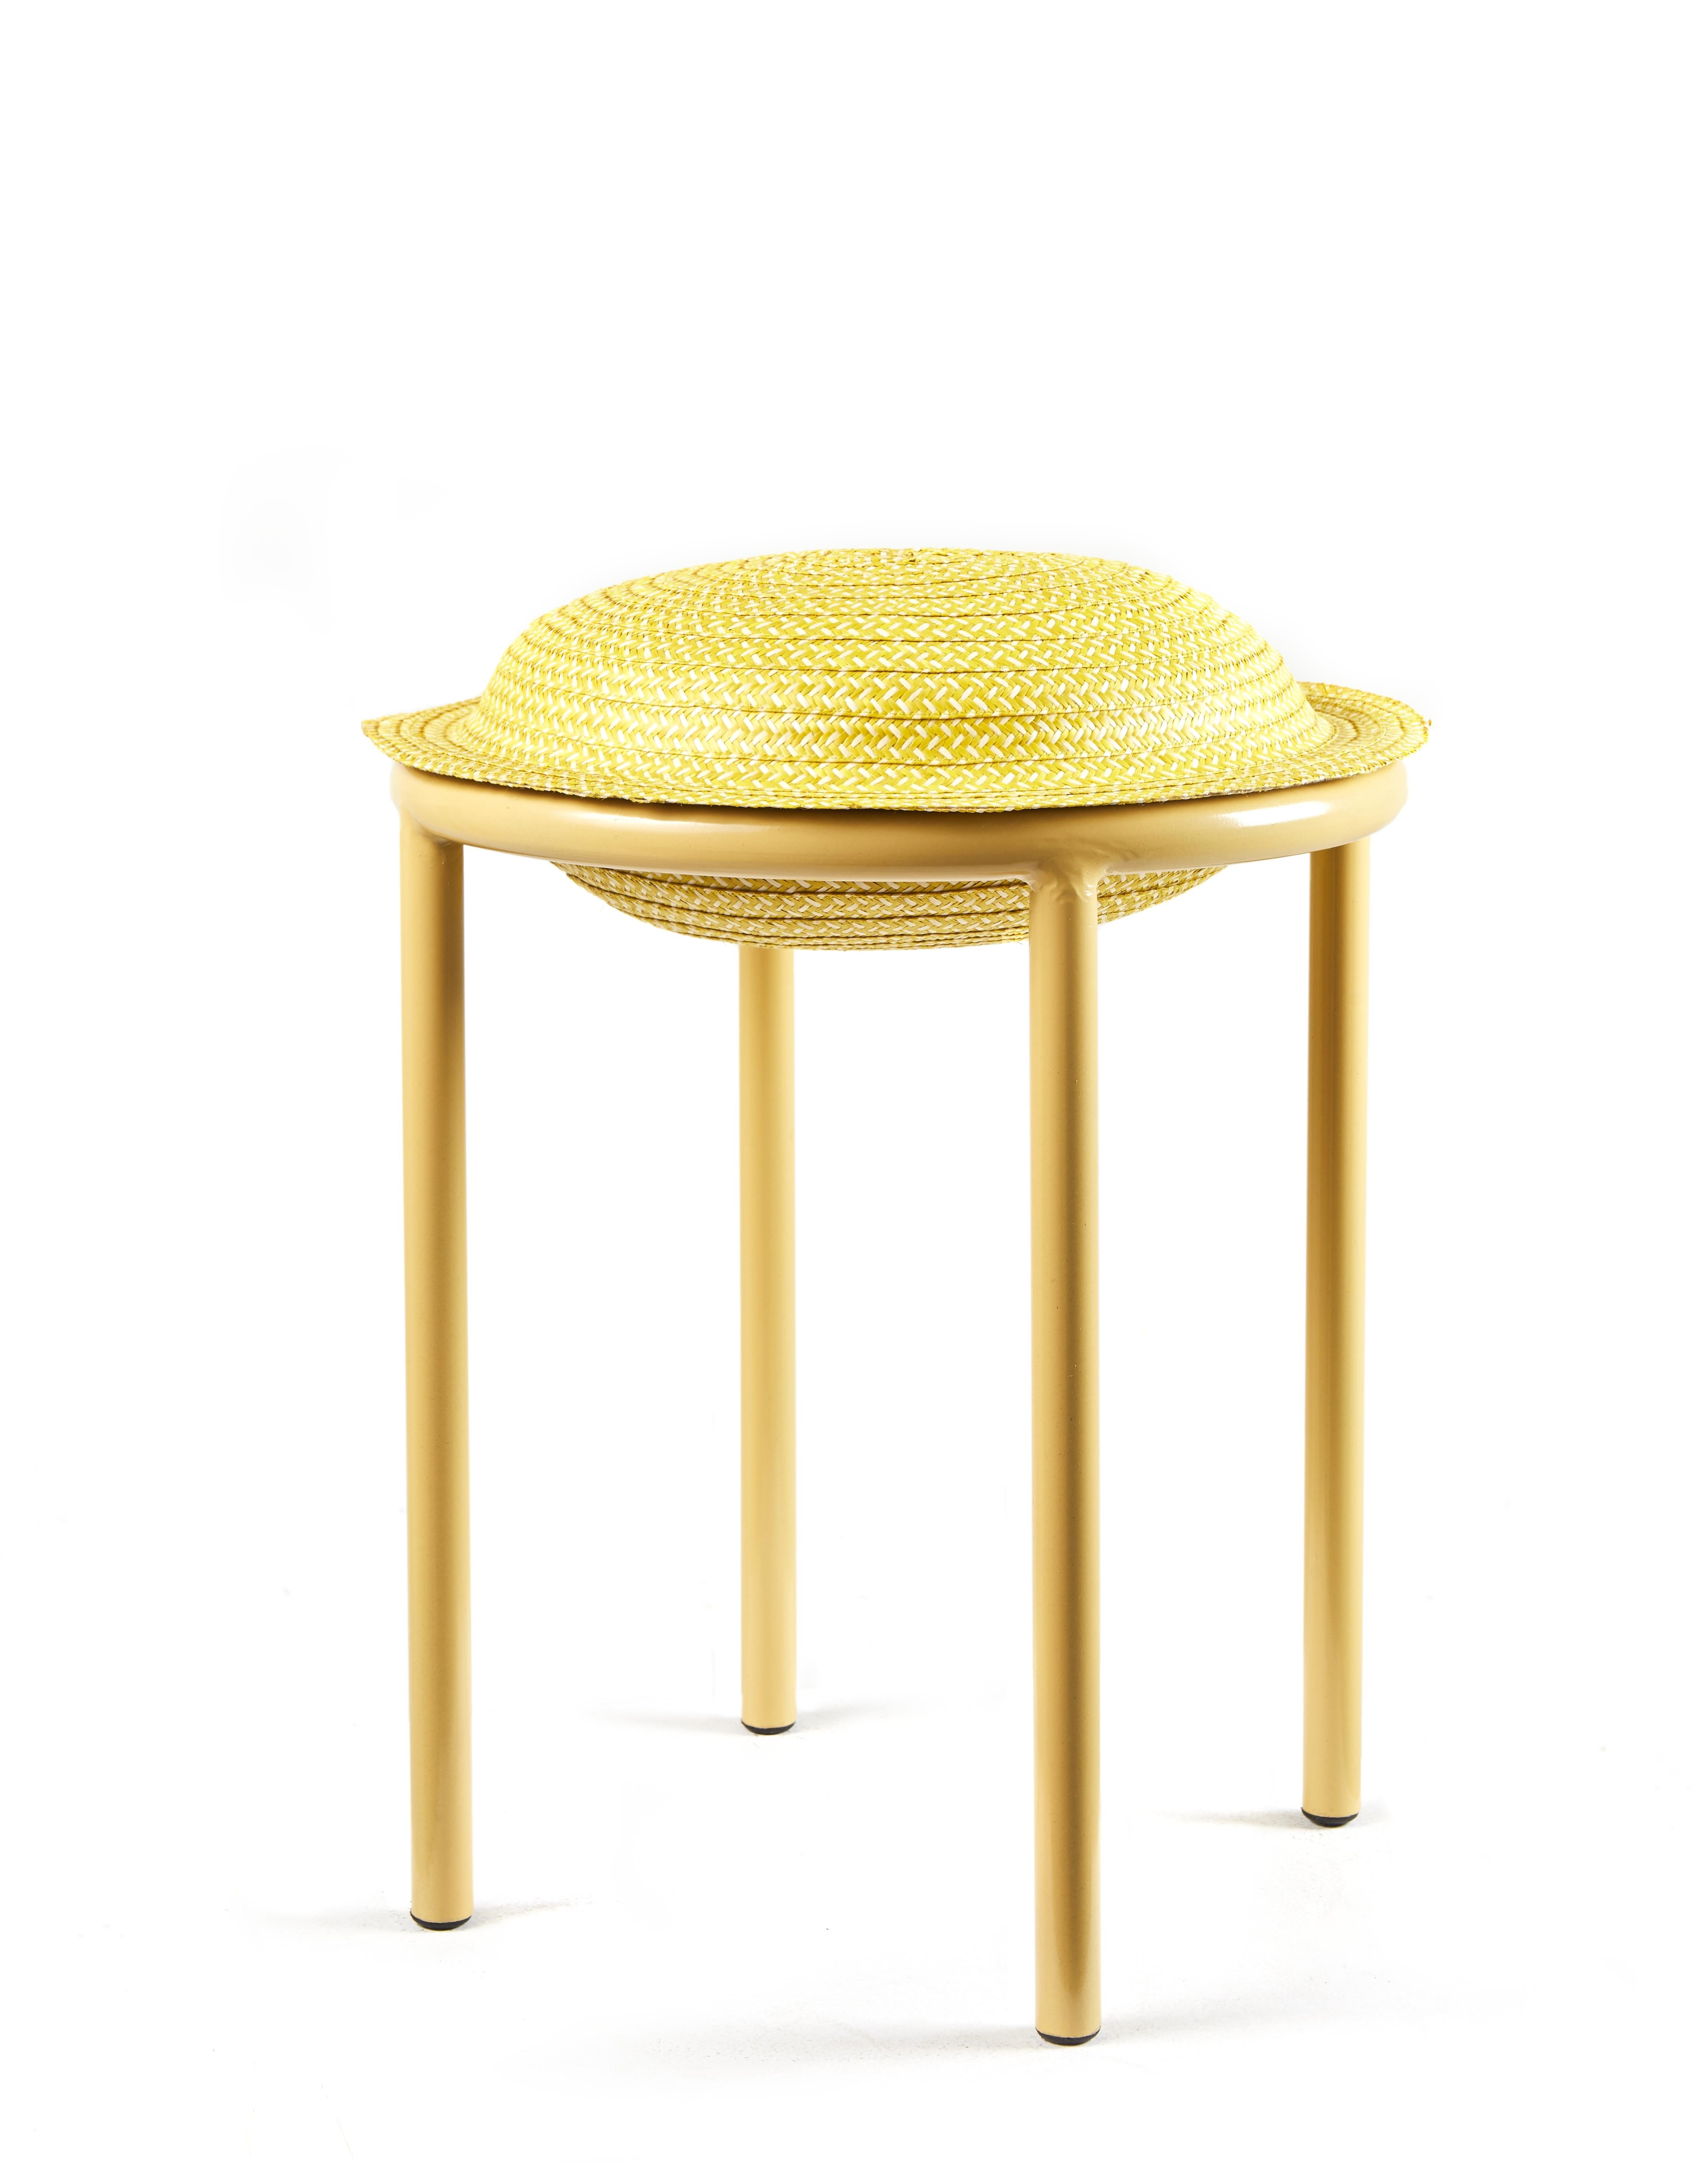 Set of 4 Yellow Cana stool by Pauline Deltour by Cristina Celestino
Materials: Galvanized and powder-coated tubular steel. Caña Flecha.
Technique: Hand-woven with natural fibers in Colombia. Natural dyed. 
Dimensions: Diameter 40.2 x height 48.1